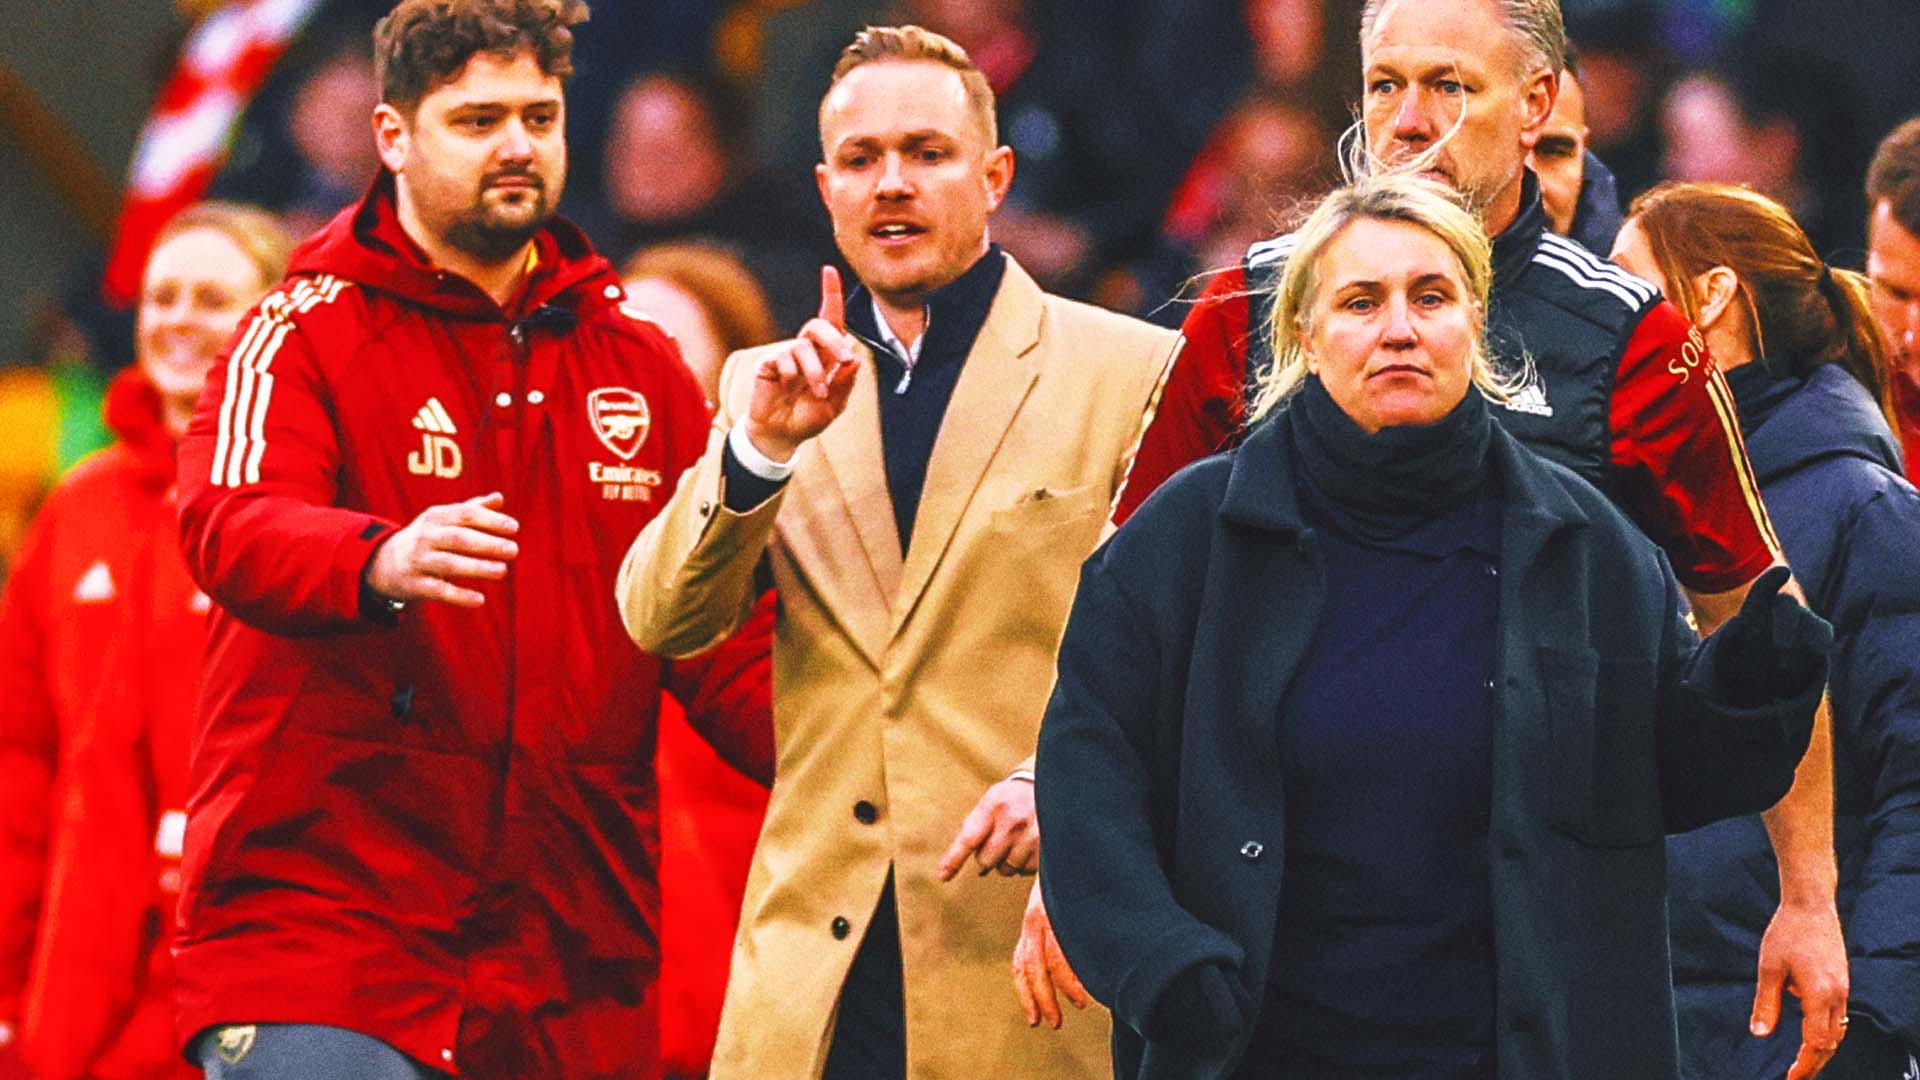 Chelsea’s Emma Hayes slams ‘male aggression’ after clash with Arsenal coach